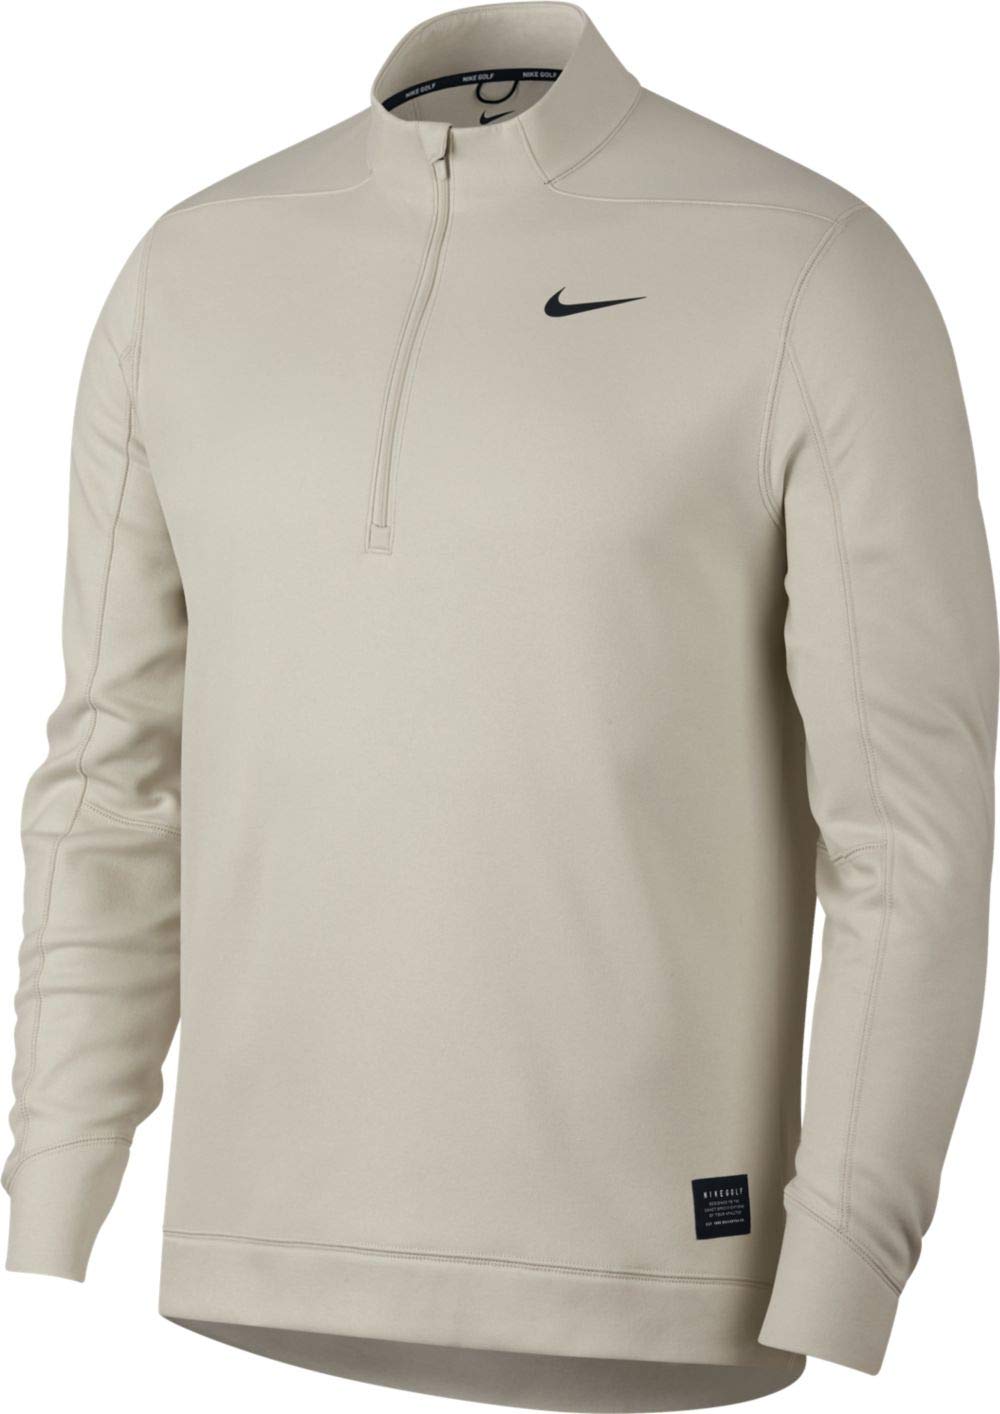 Mens Nike Therma Top Golf Pullovers